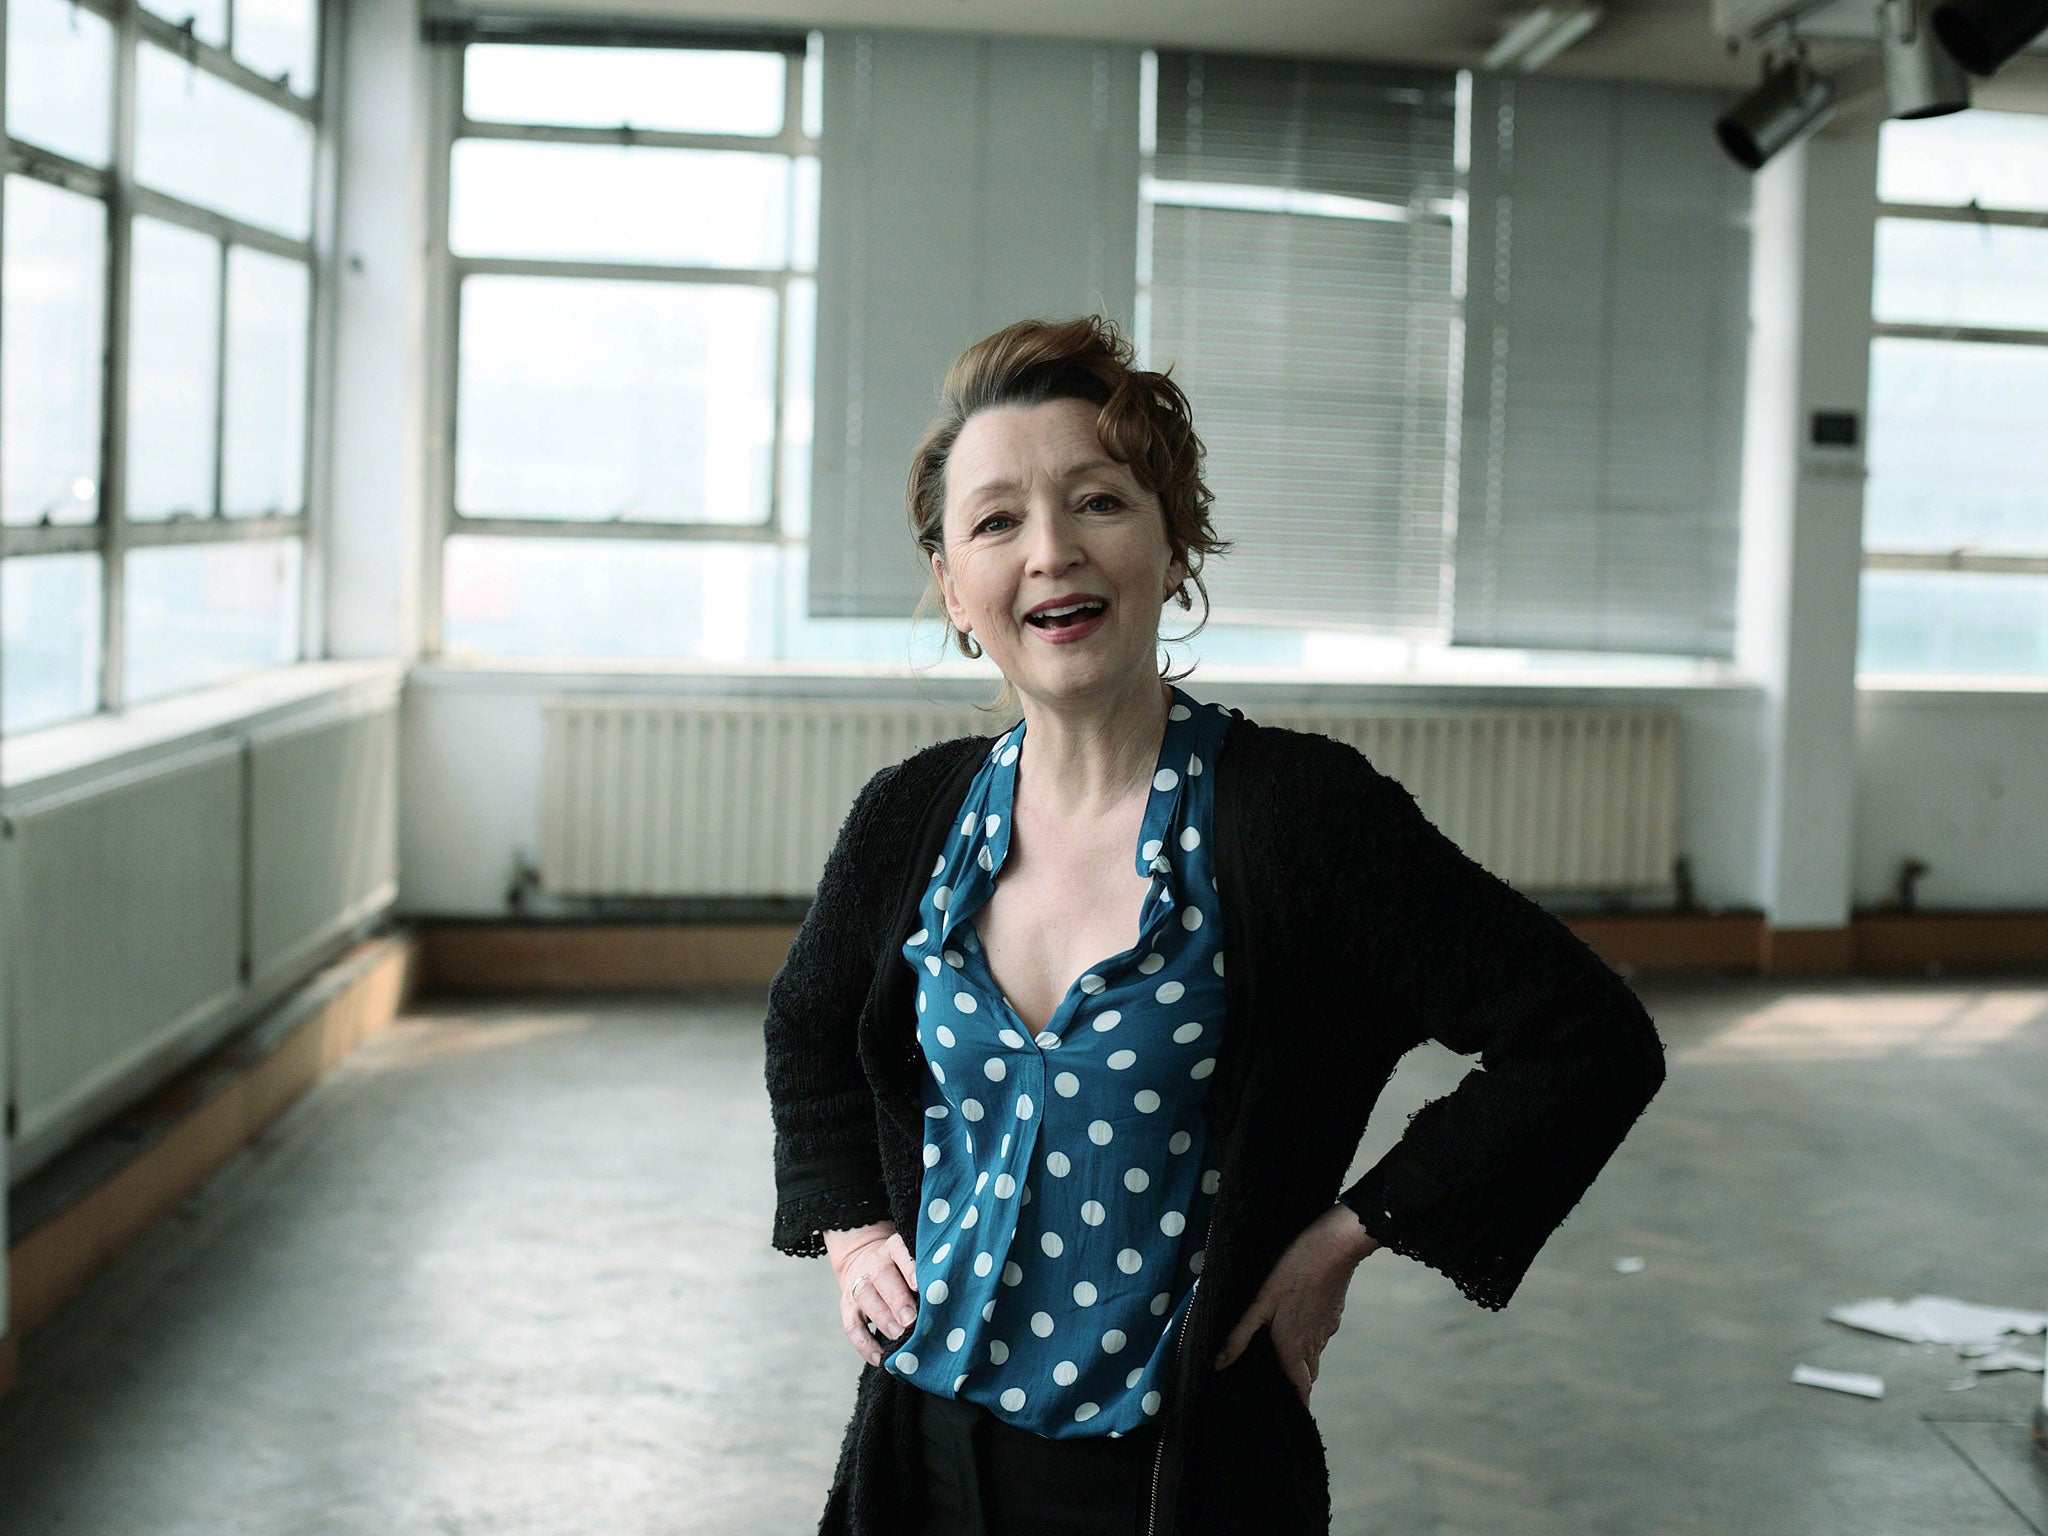 Pixie Dream Girl Lesley Manville ‘had a lovely time’ playing a flying blue pixie in Maleficent, following her award-winning performance in Ibsen’s Ghosts.